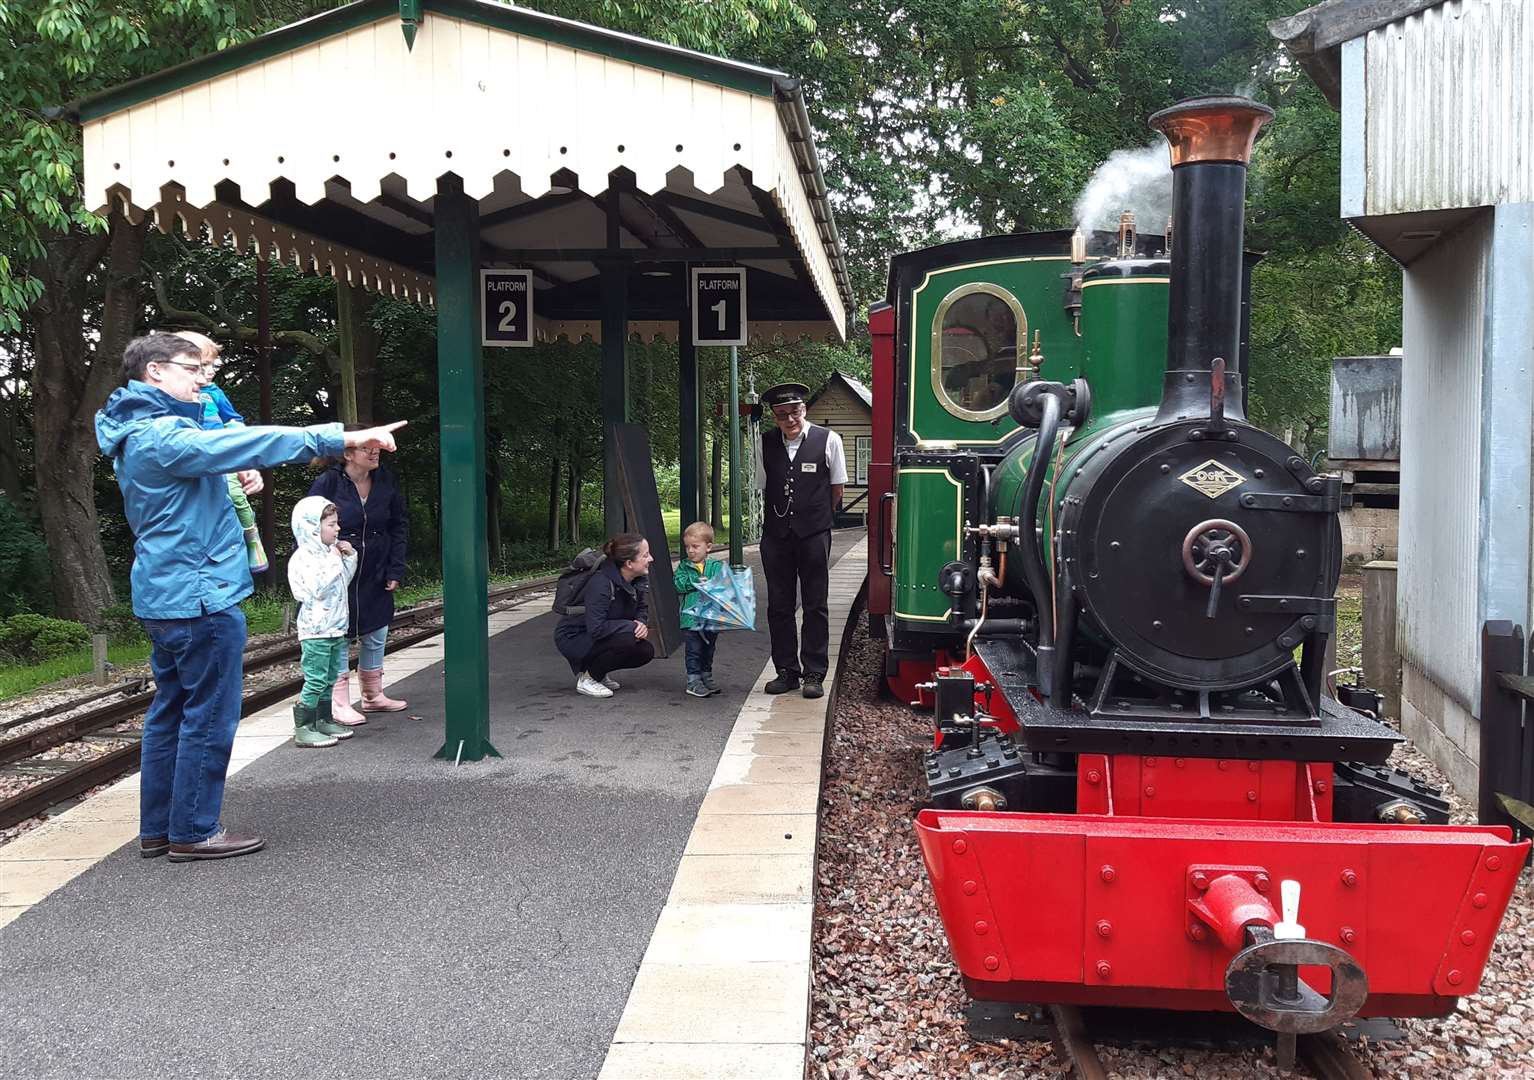 Bredgar and Wormshill Light Railway is a day out for all ages